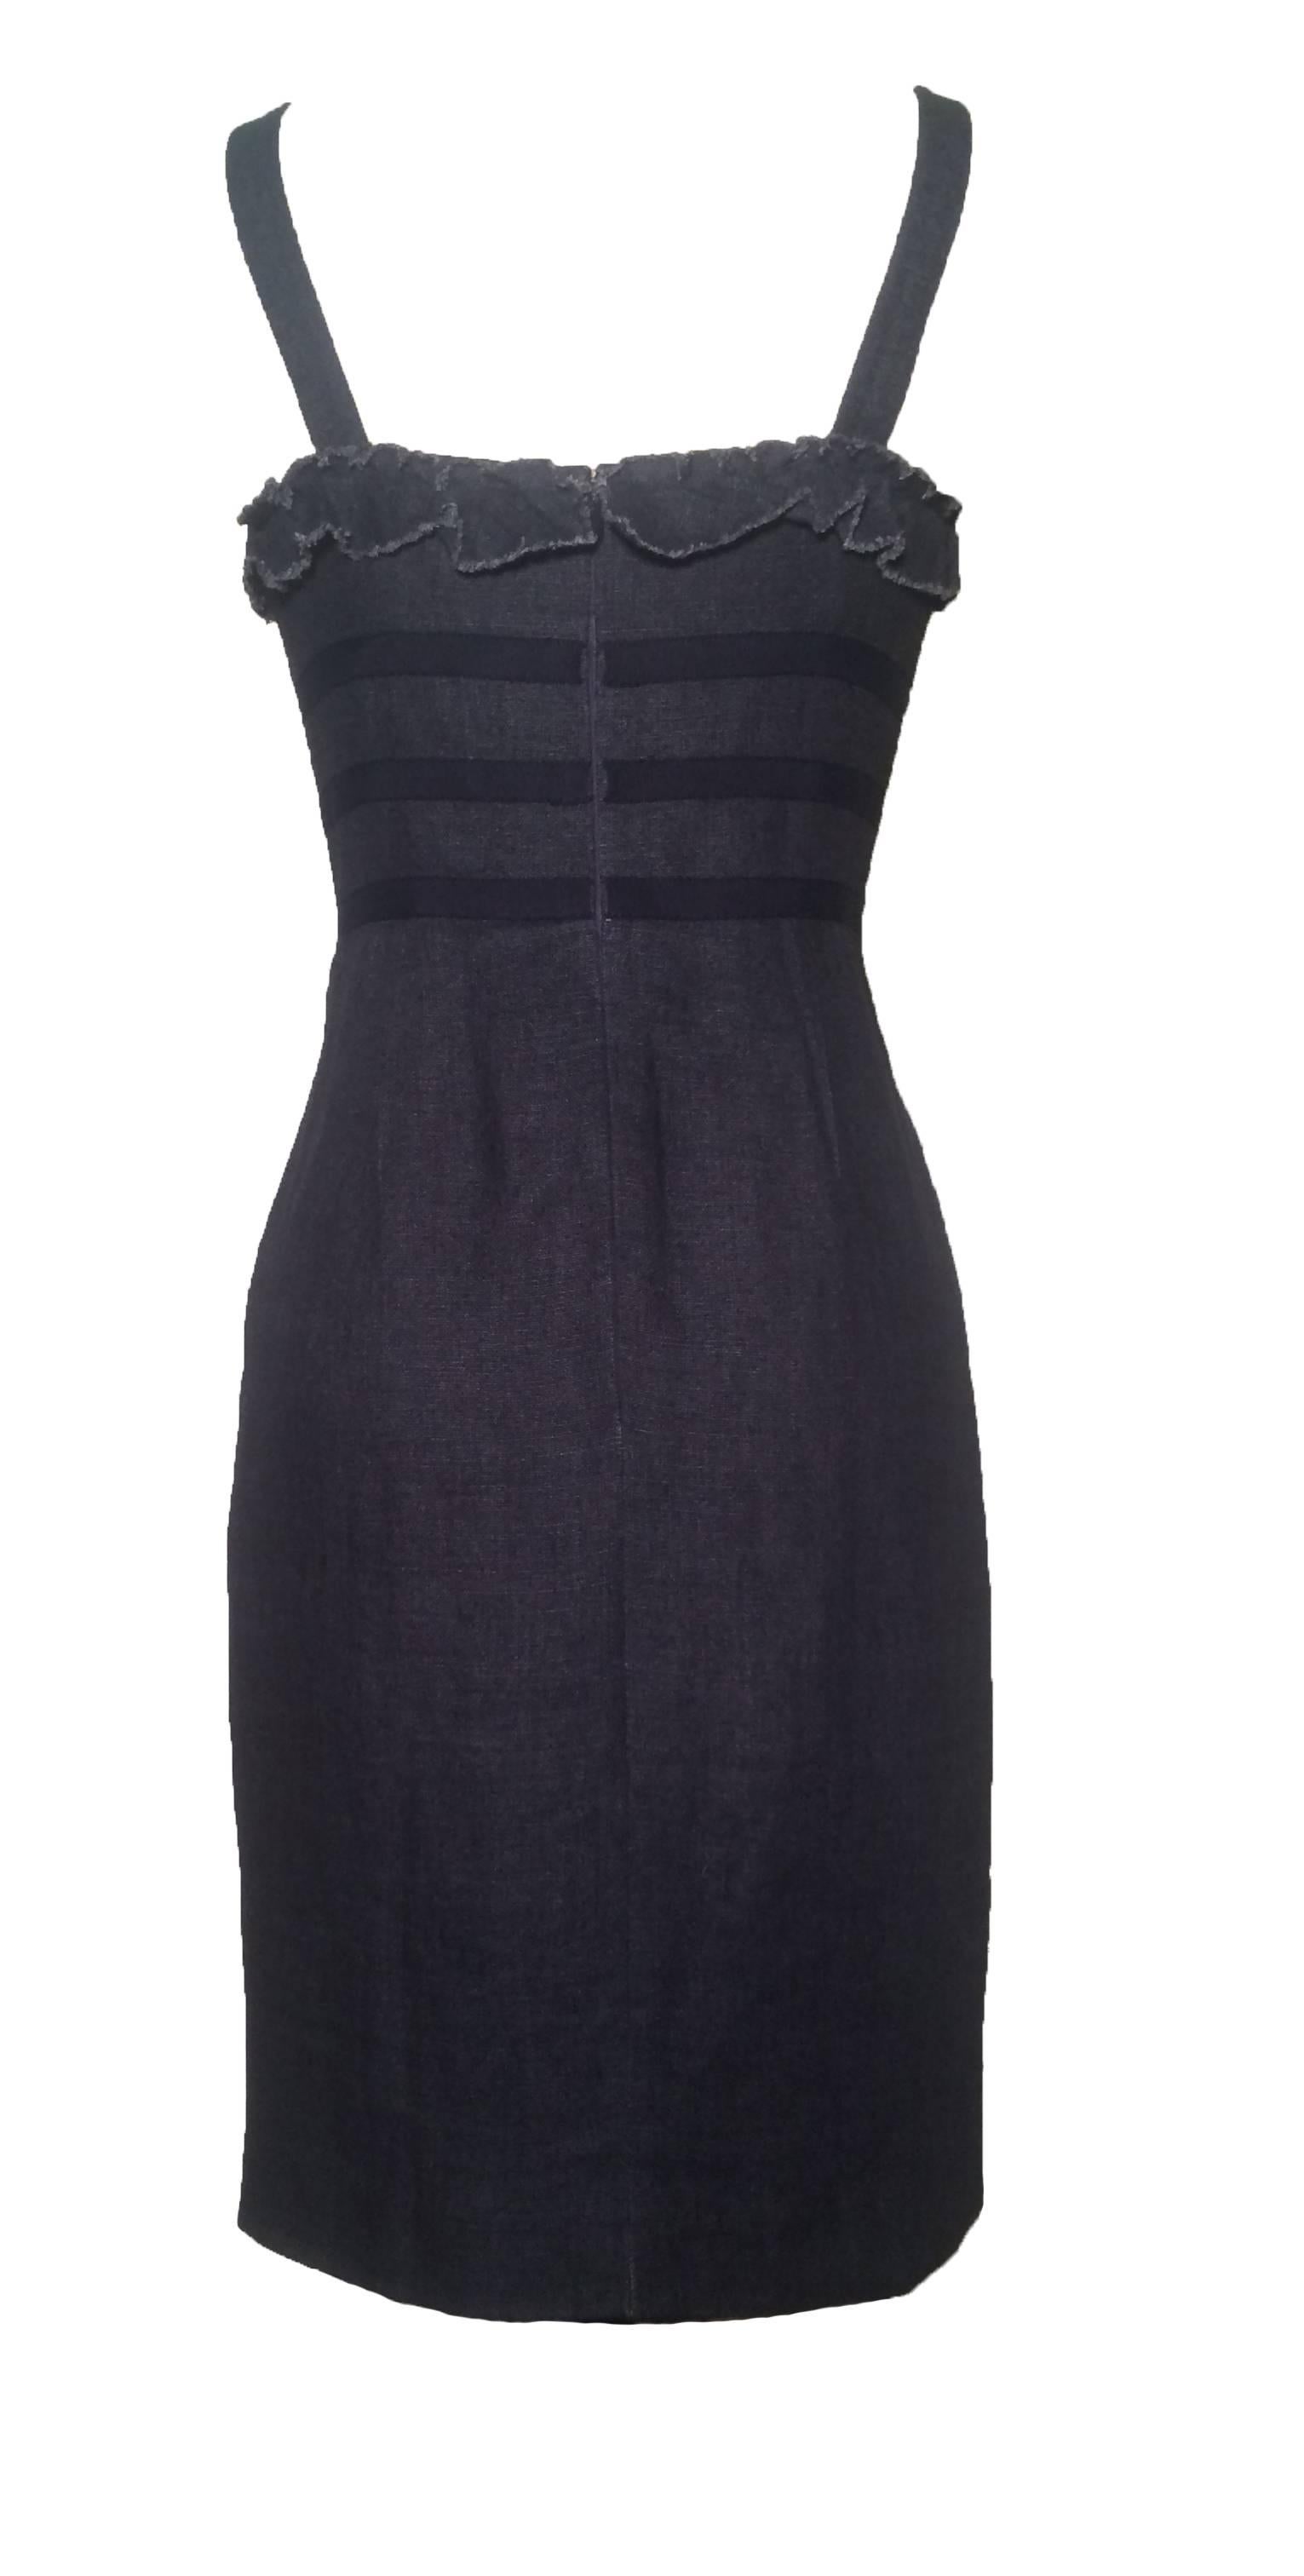 Oscar de la Renta denim pencil dress with ruffle trim. Navy trim circles the bodice.

Back zip and hook and eye.

Size 2
Bust 32".
Waist 26".
Hip 34".

97% cotton, 3% lycra. Fully lined in 100% silk.

Made in